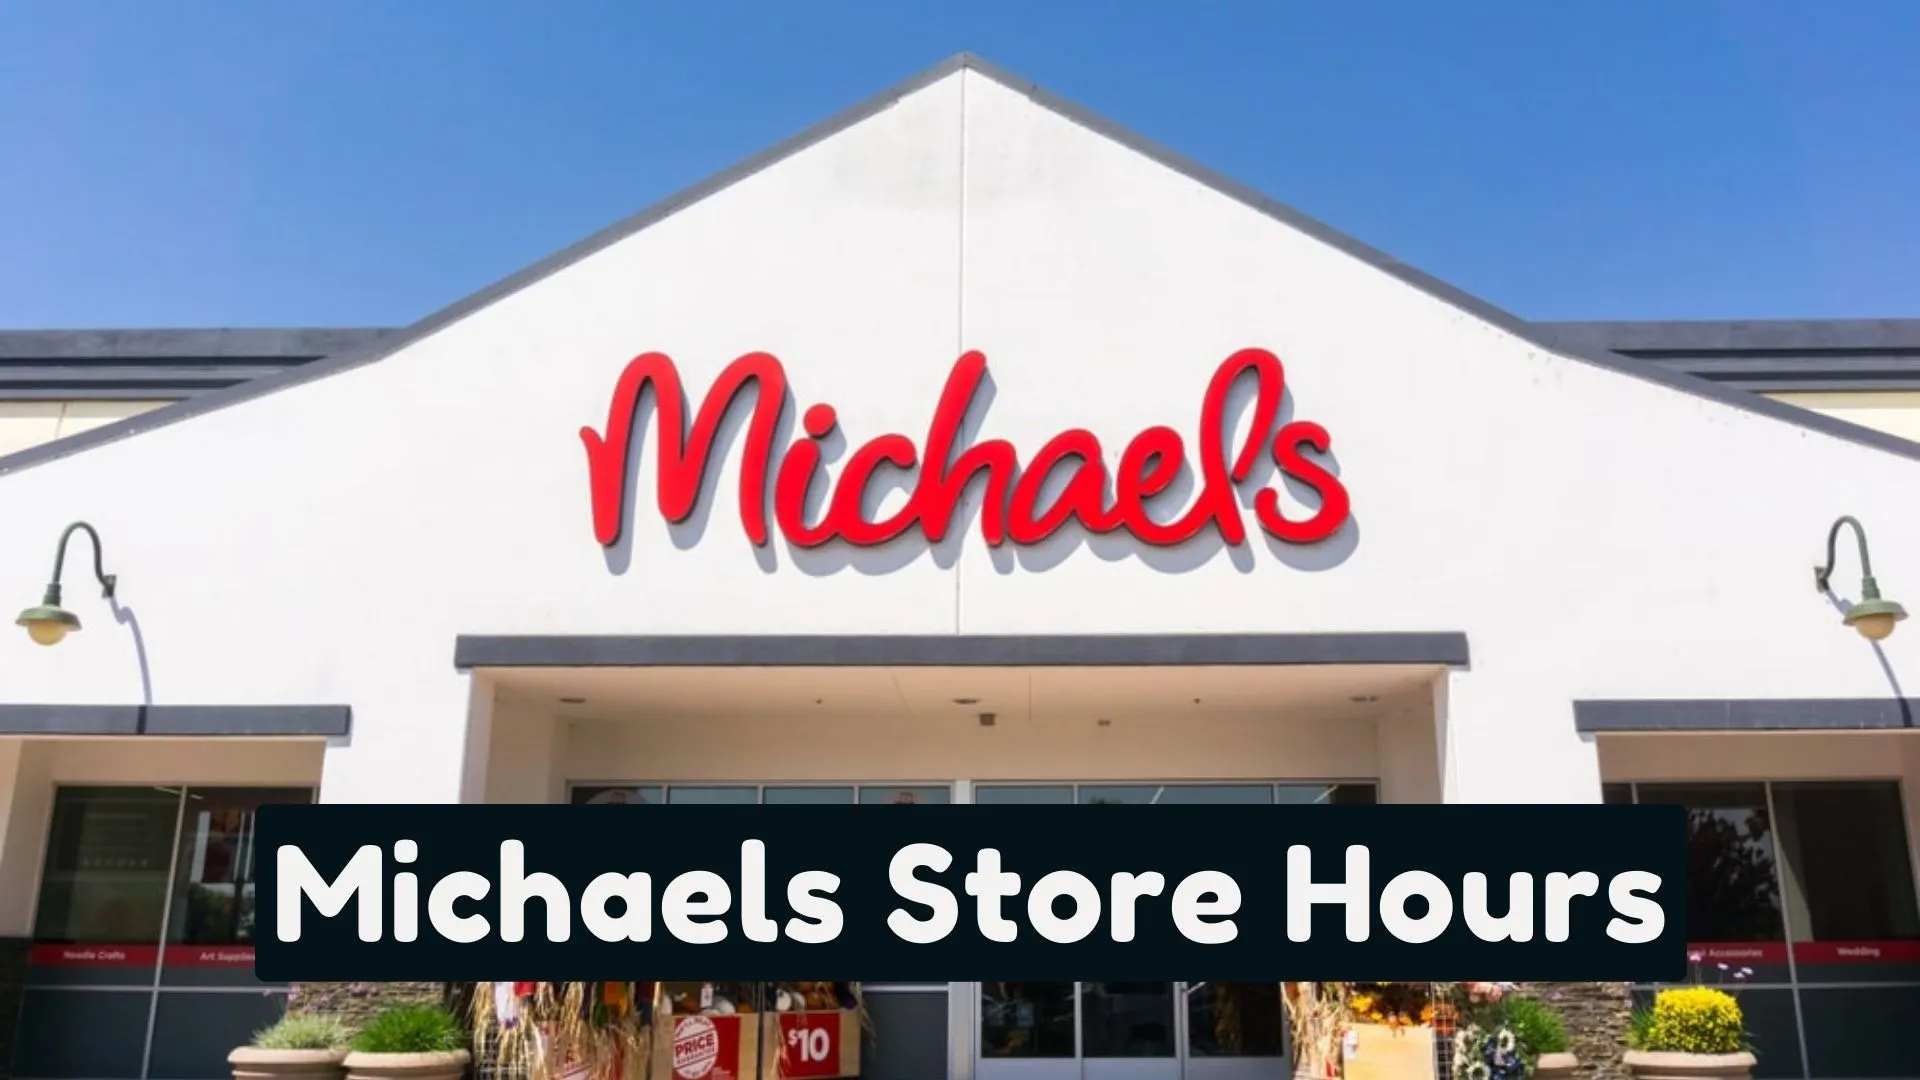 Michaels Hours & Timings [ what time does michaels close-open ] Michaels Store hours